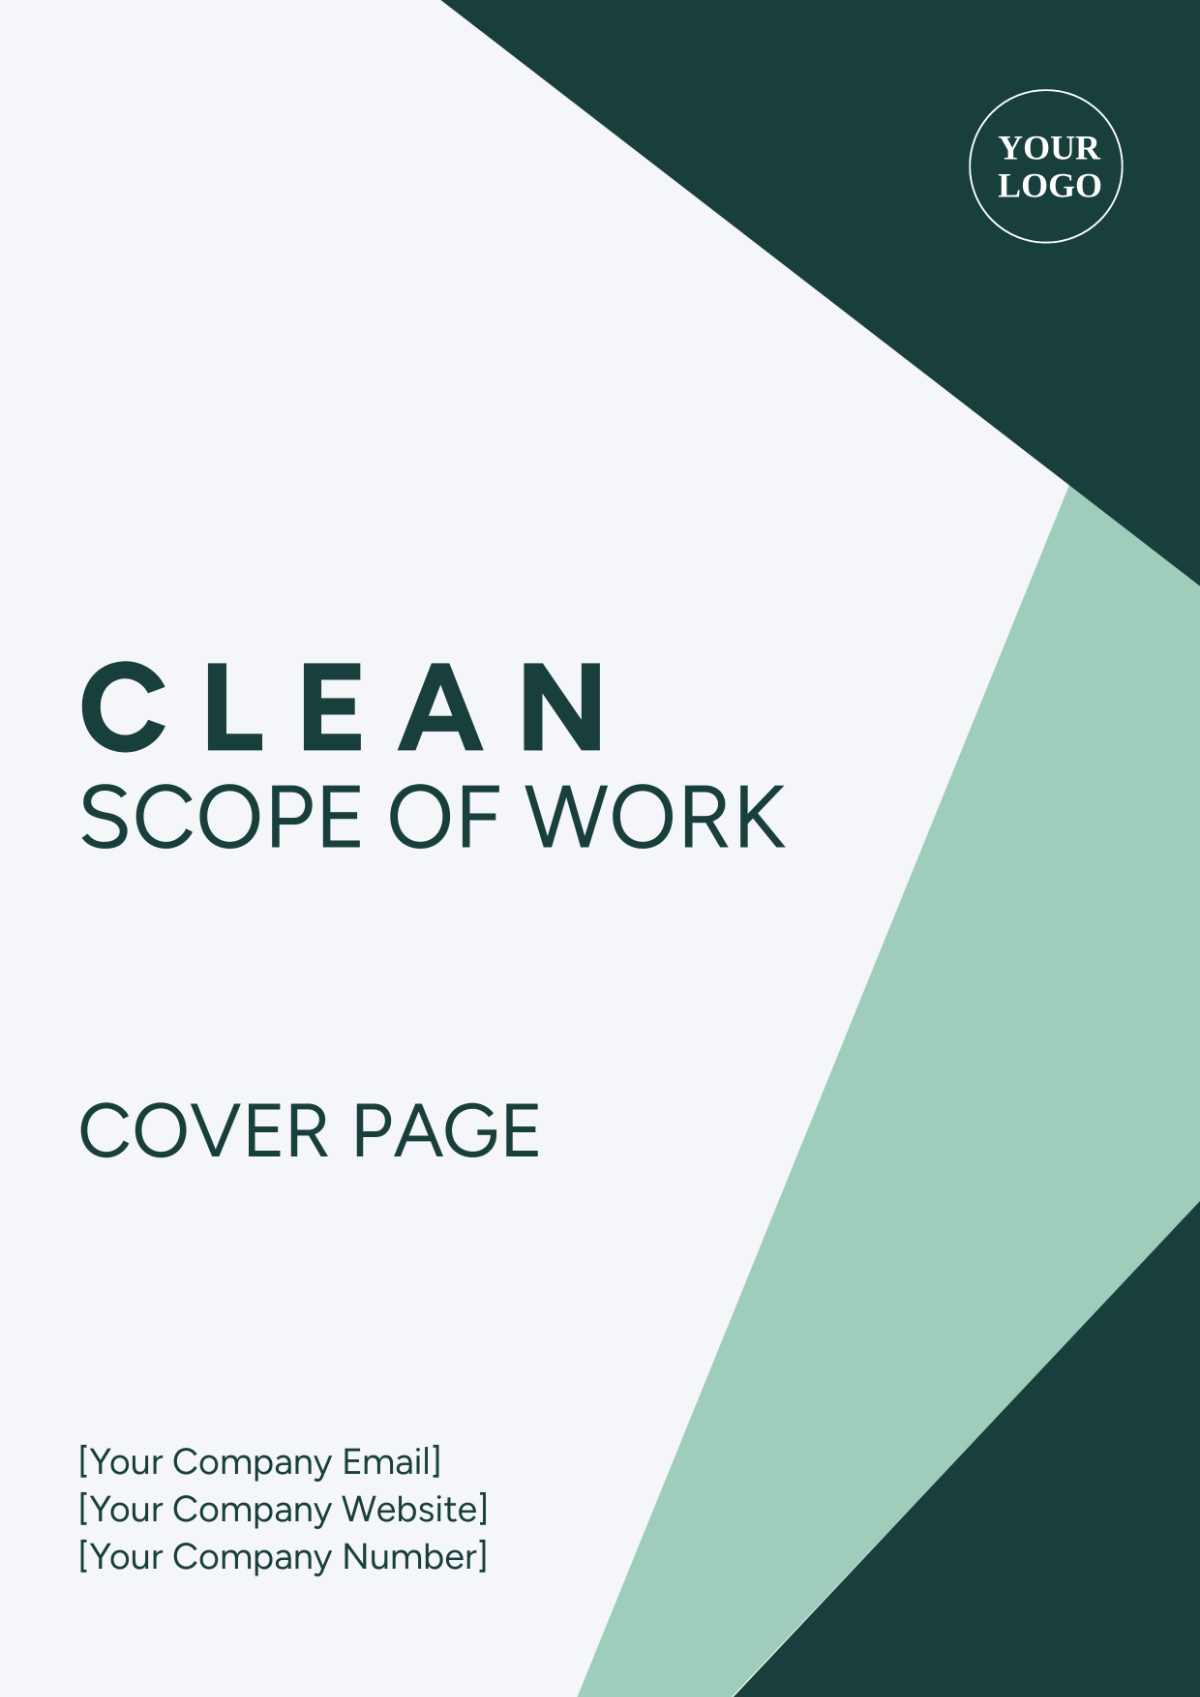 Clean Scope of Work Cover Page